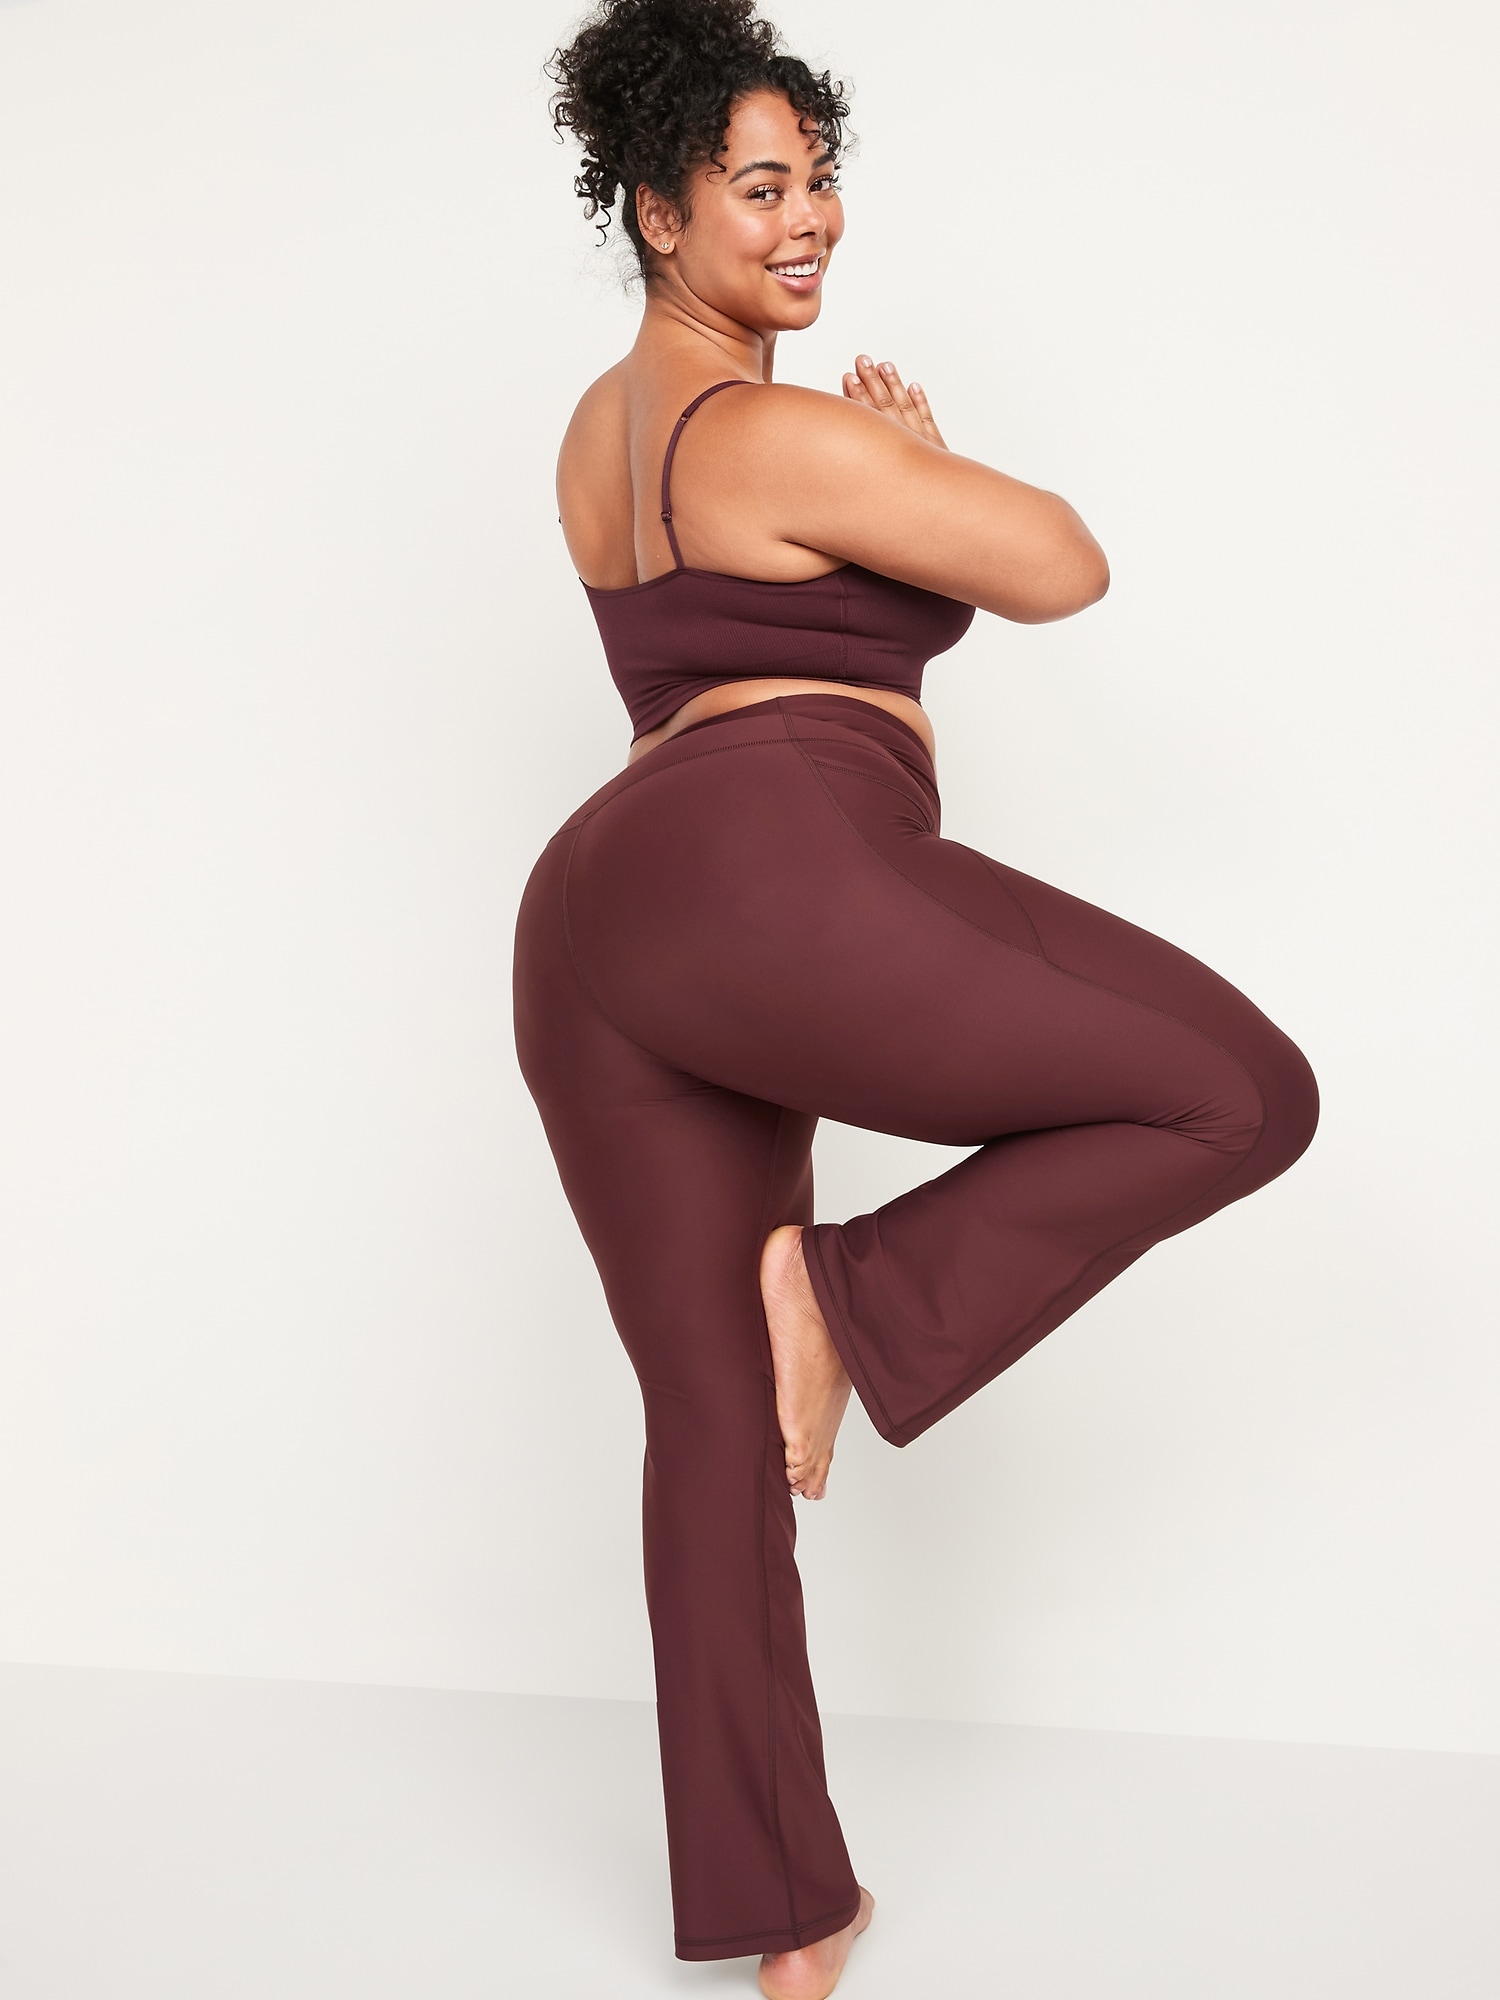 SKIMS Brown Outdoor Foldover Bootcut Leggings - ShopStyle Activewear Pants